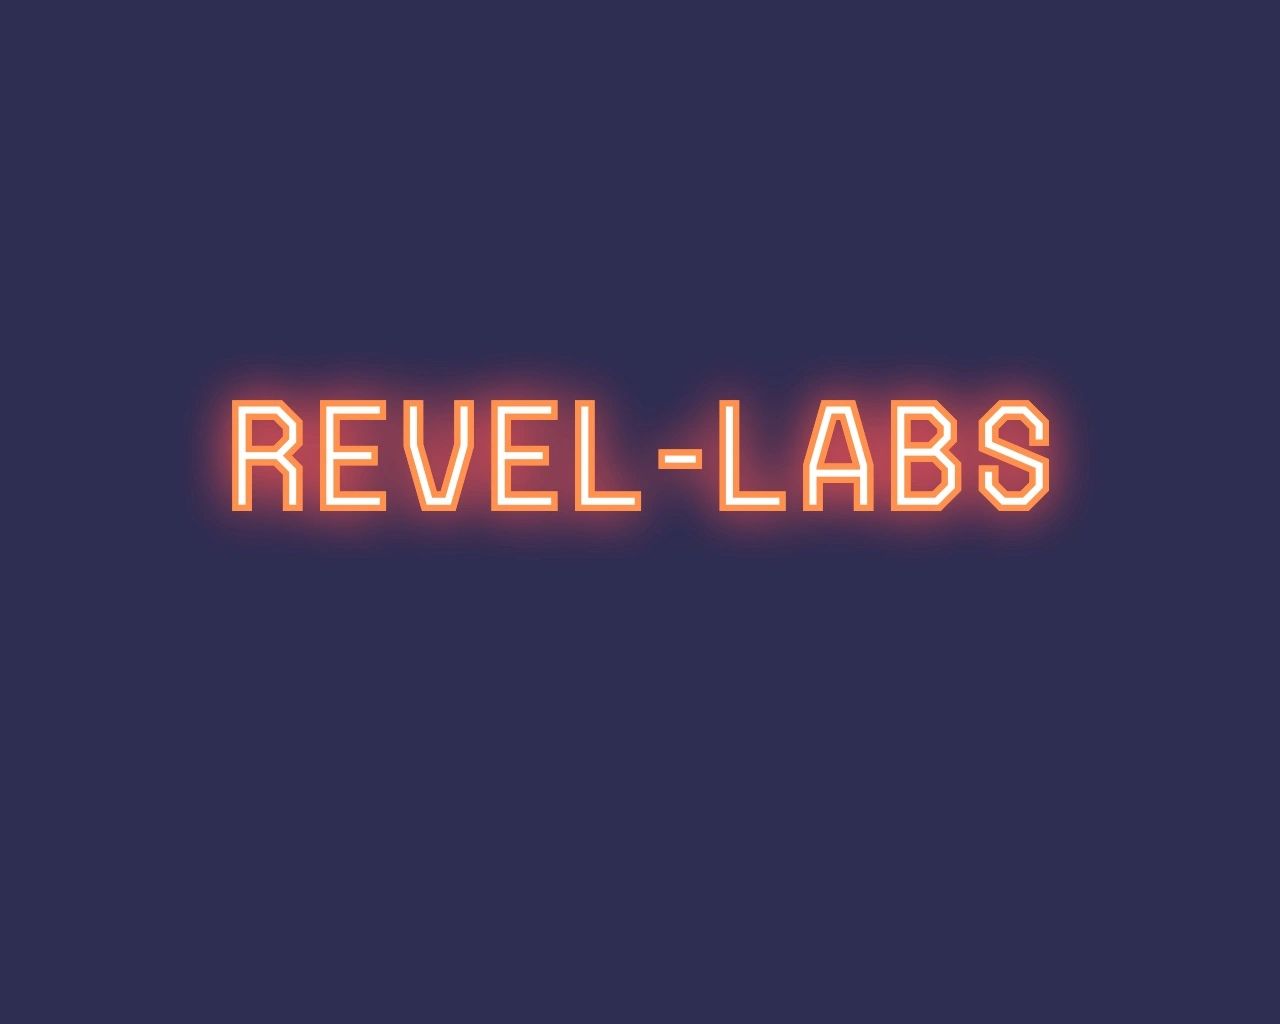 Real Laboratories Available Online: Establishment of ReVEL as a